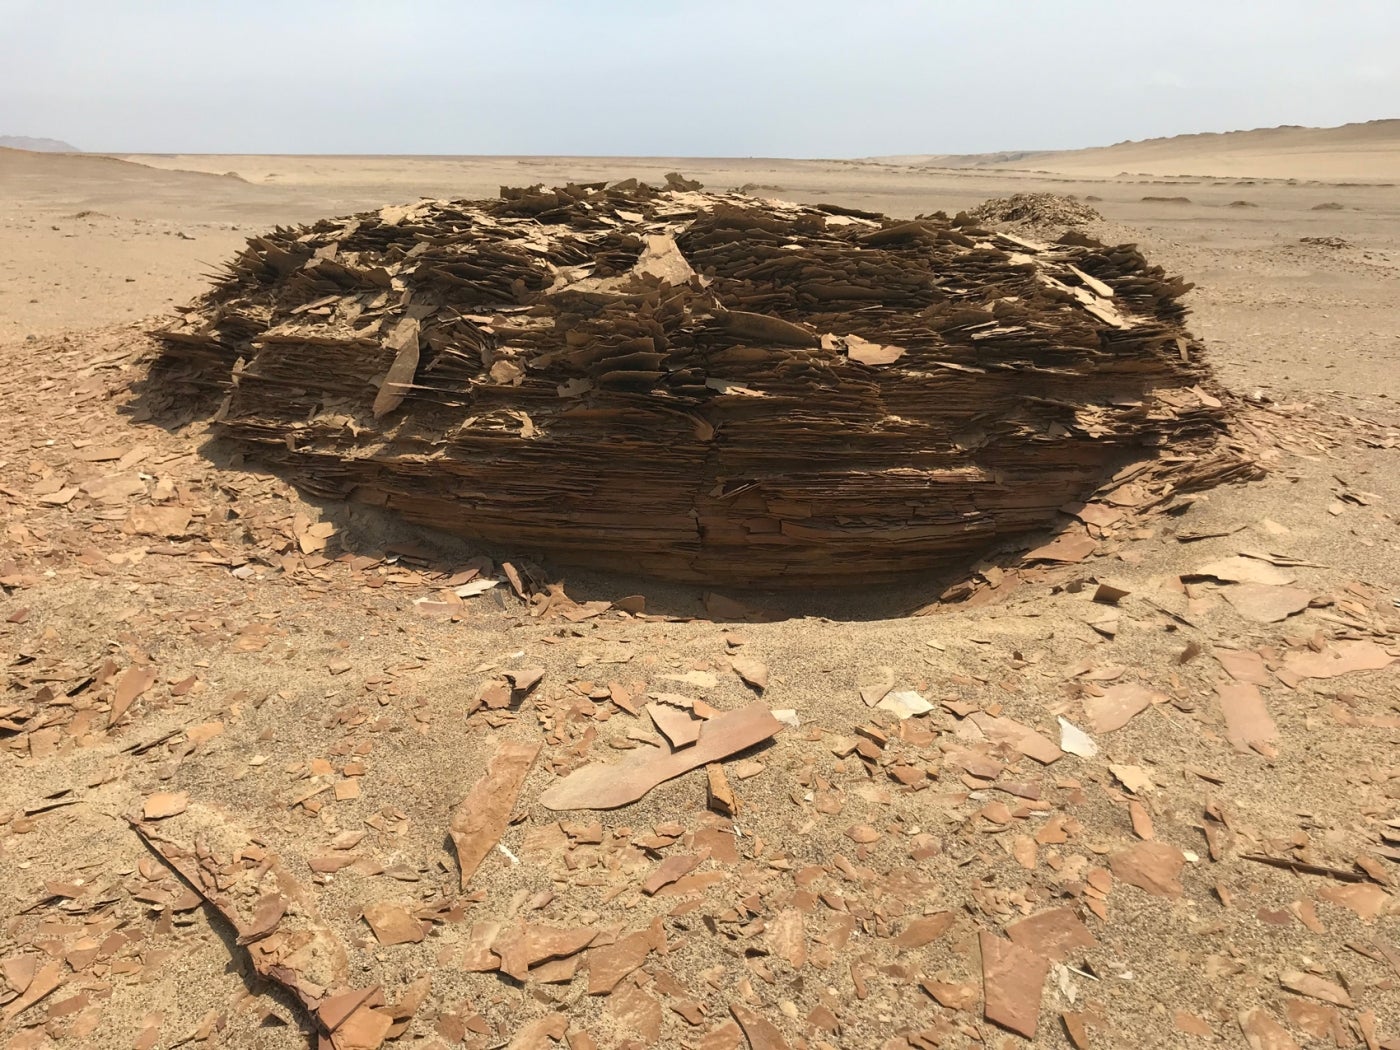 An outcrop in Peru's Paracas National Park that resembles a puff pastry with many layers